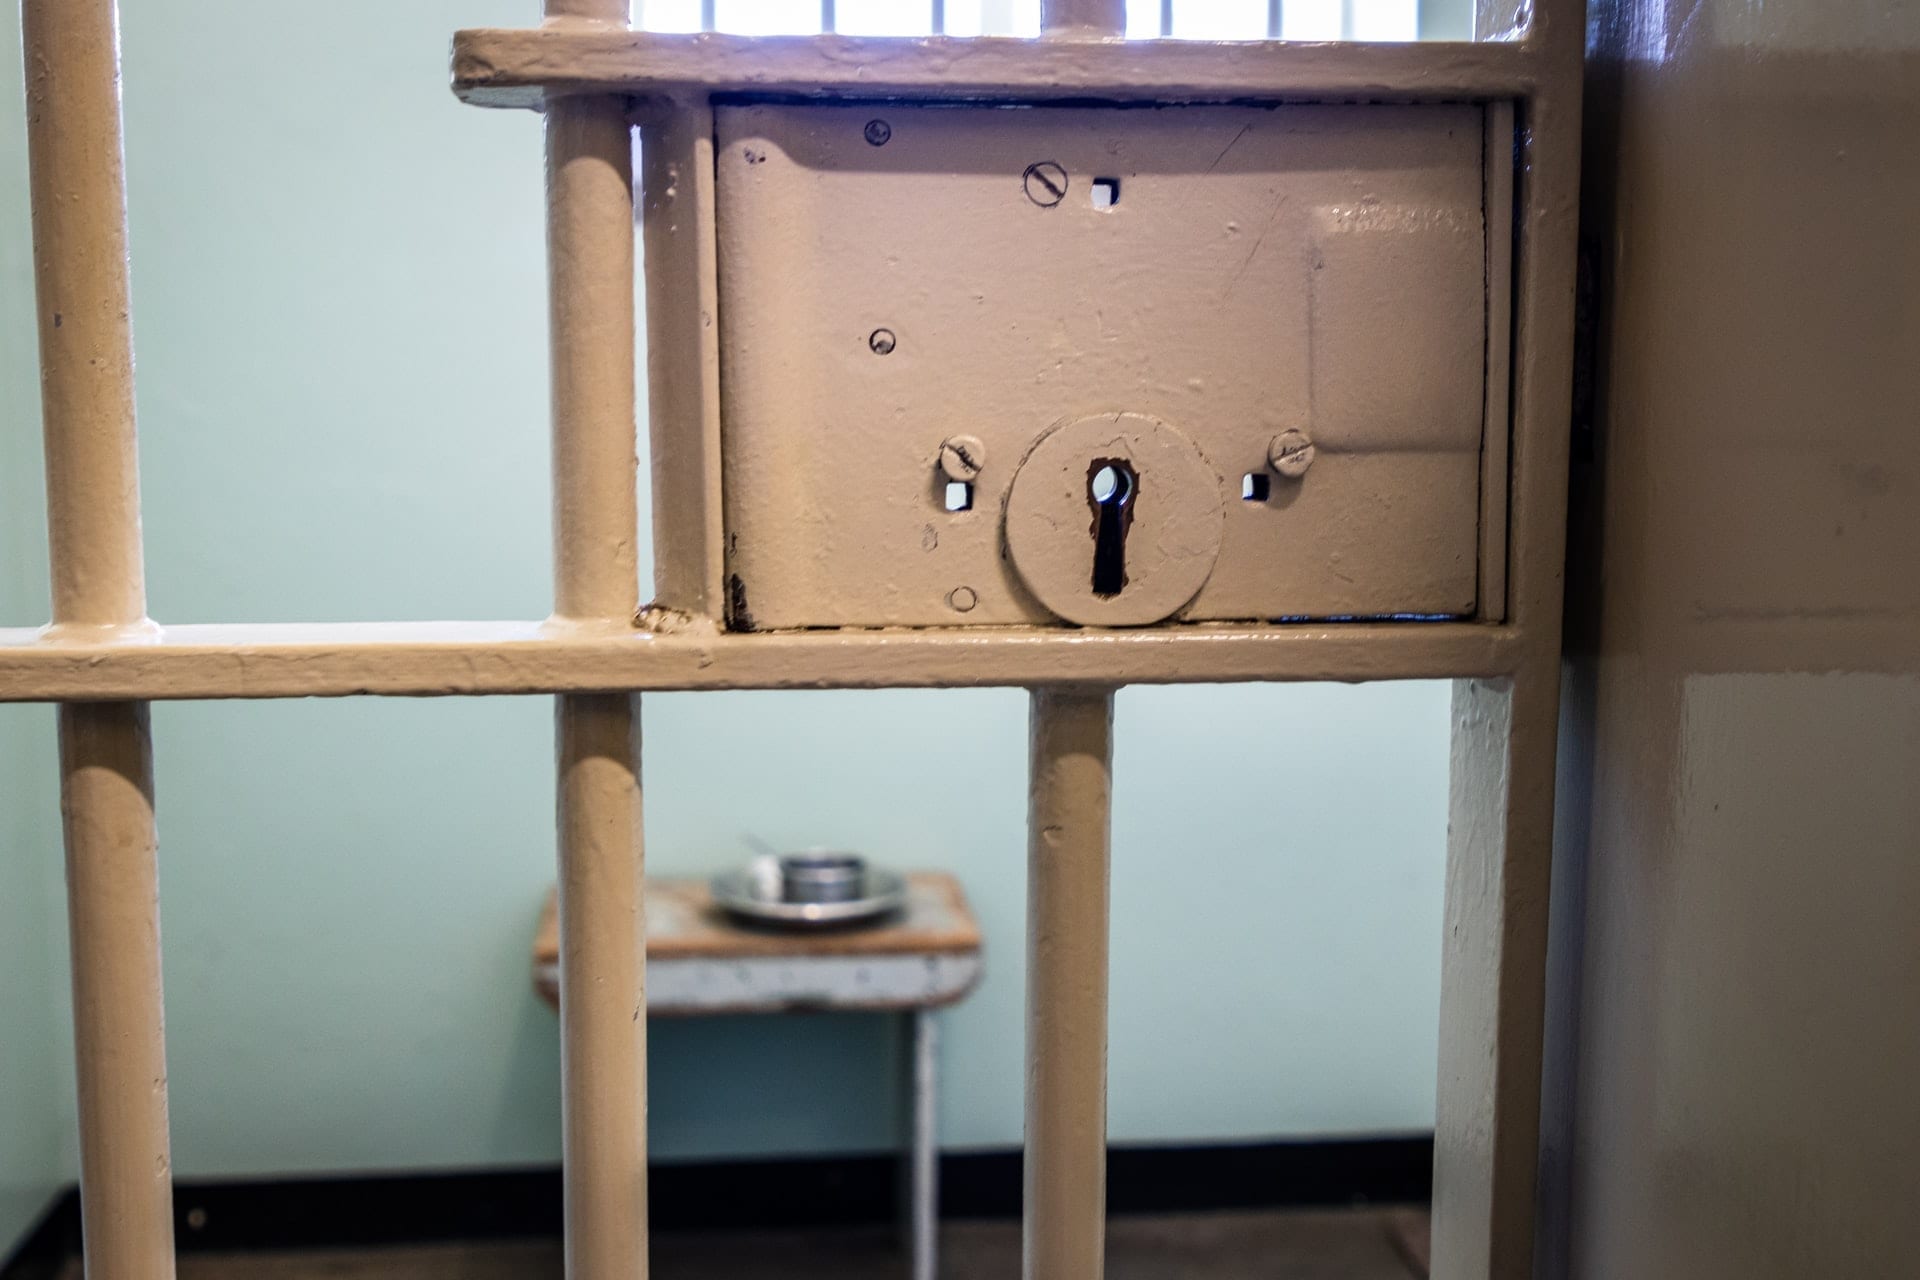 Can You File a Lawsuit over Solitary Confinement Conditions?